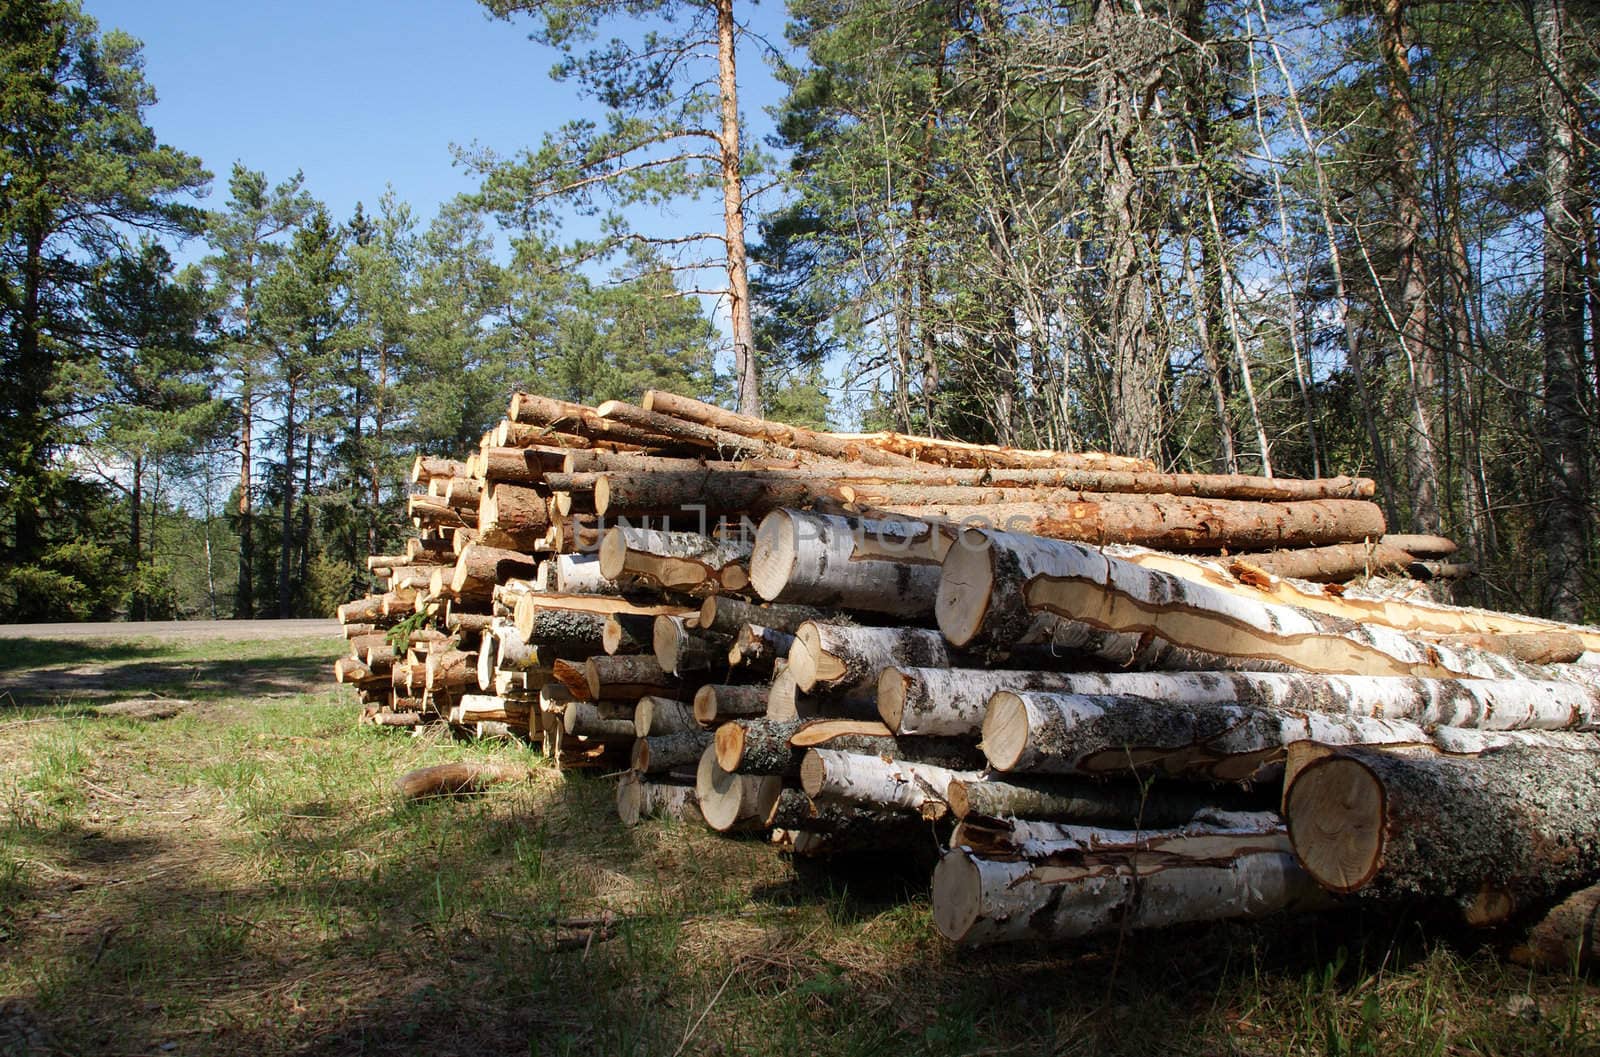 Timber logs stacked in forest, ready for transport. Photographed in Salo, Finland in May 2010.